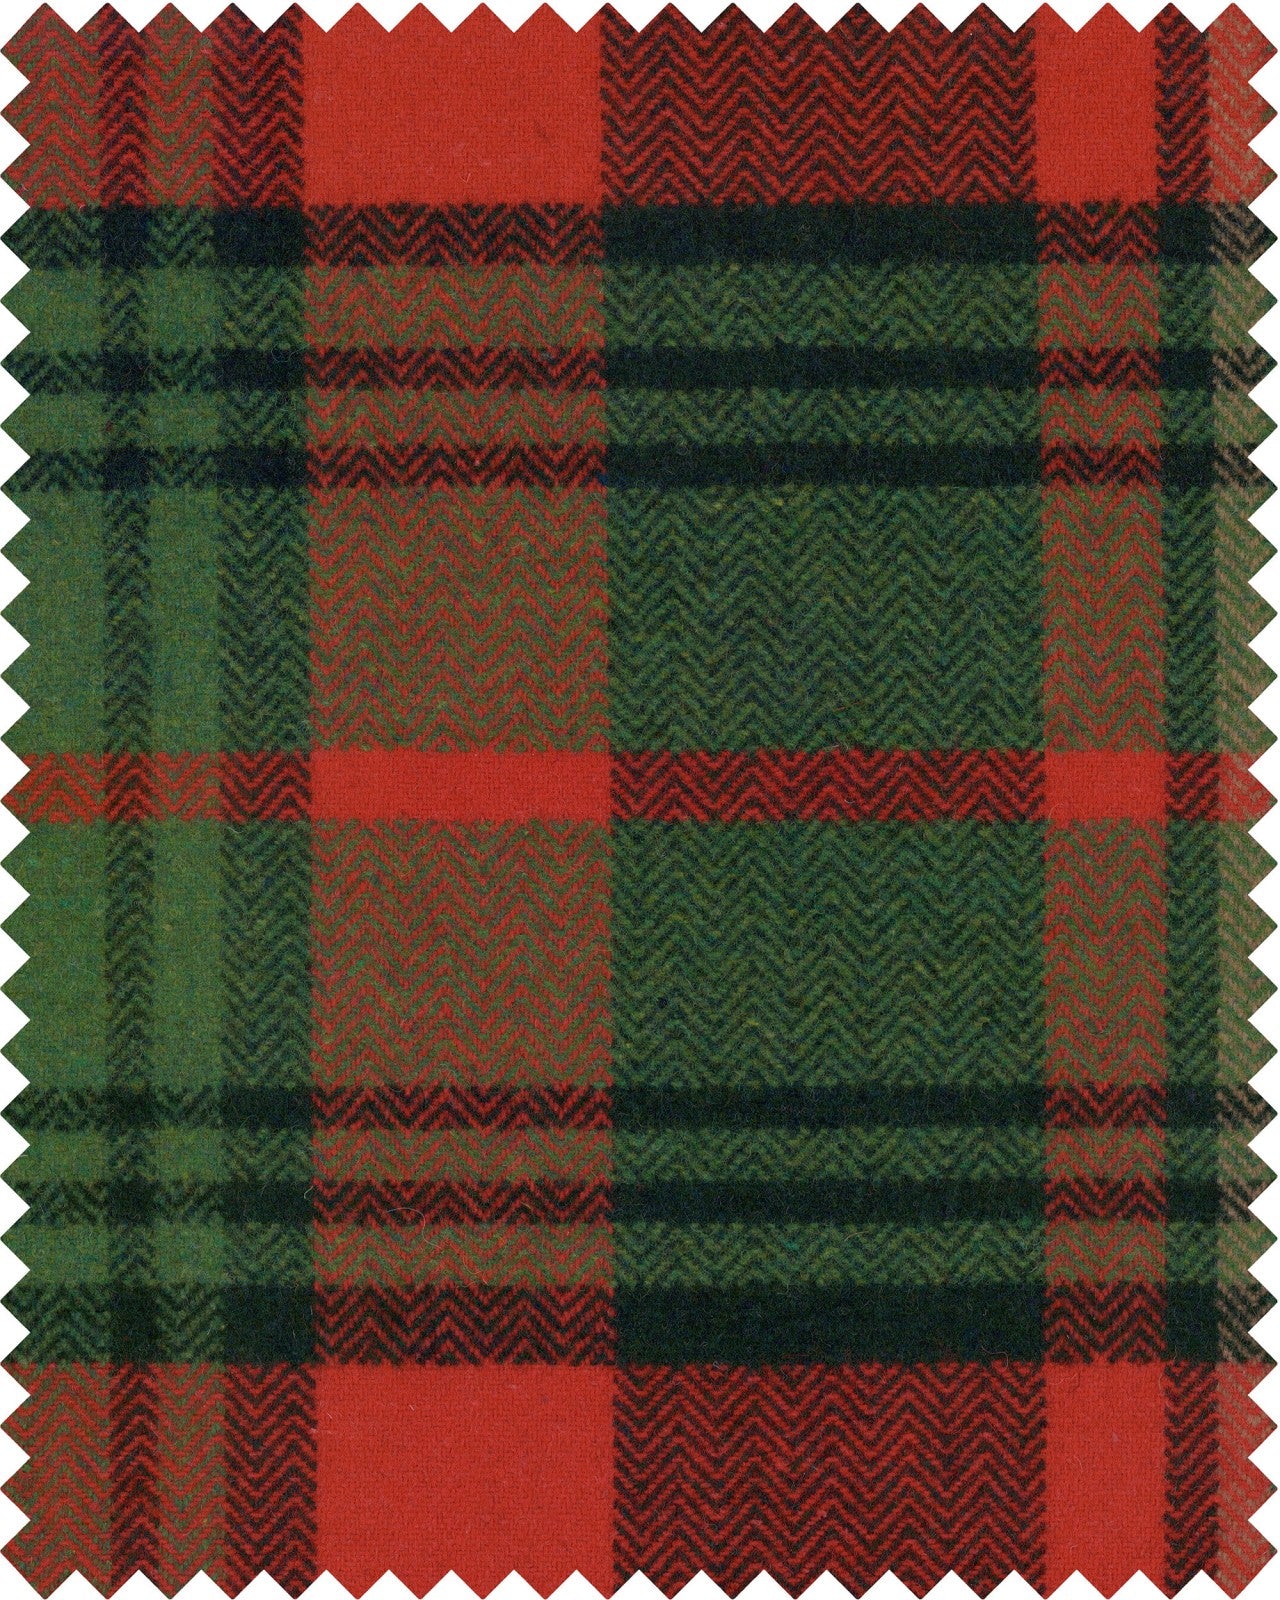 Tyrolean Plaid fabric in black red green color - pattern number FB00115 - by Mind The Gap in the Tyrol Apres-ski Home Collection collection